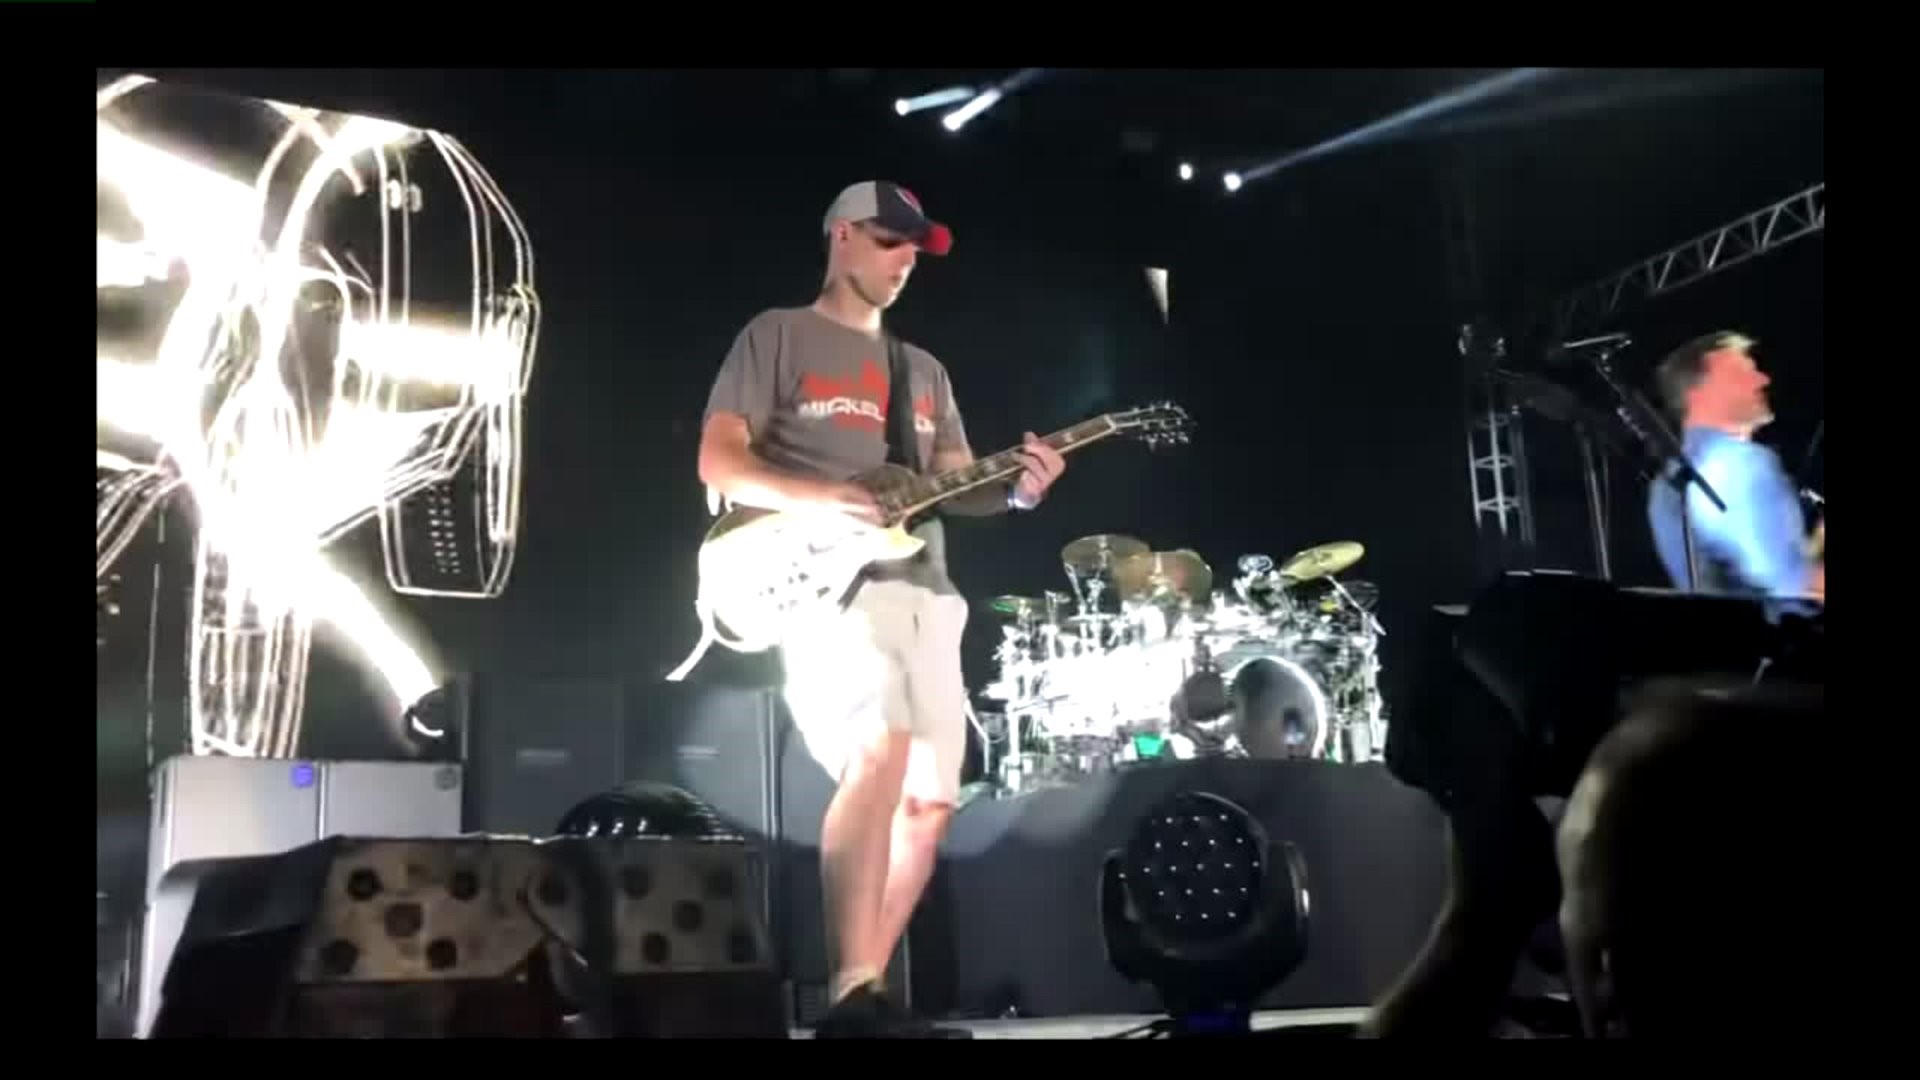 Nickelback fan goes up on stage to play with band for the (second) chance  of a lifetime 